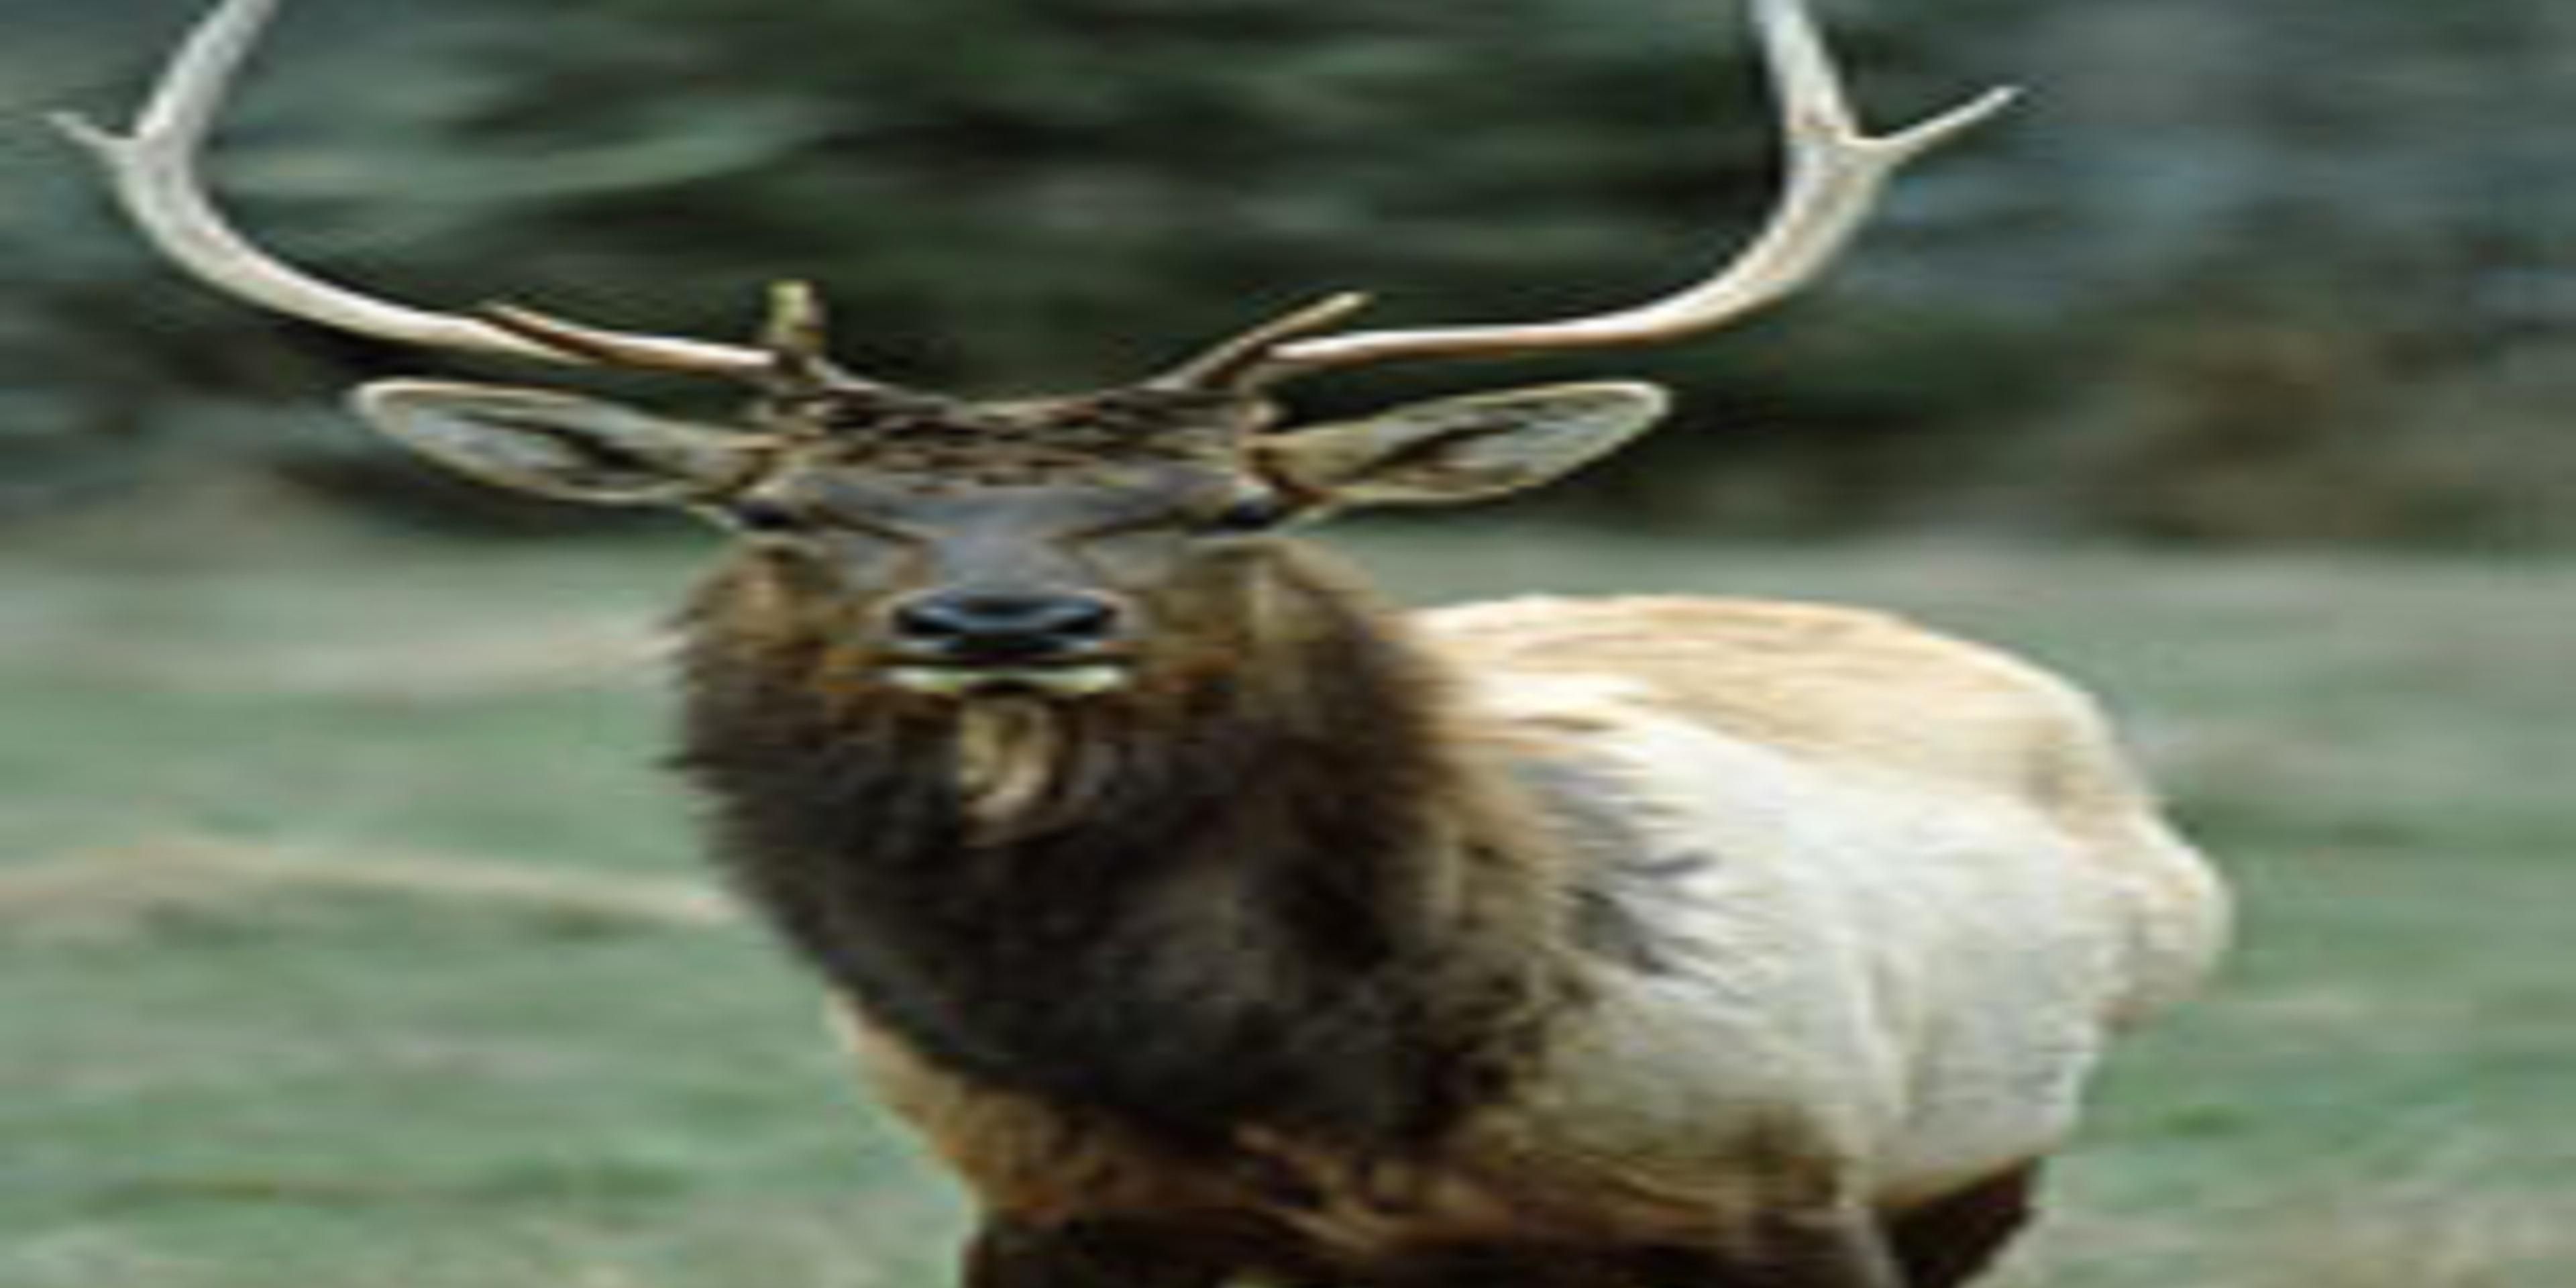 Gaylord offers the opportunity for elk viewing, just a short drive from the Holiday Inn Express and Suites of Gaylord.